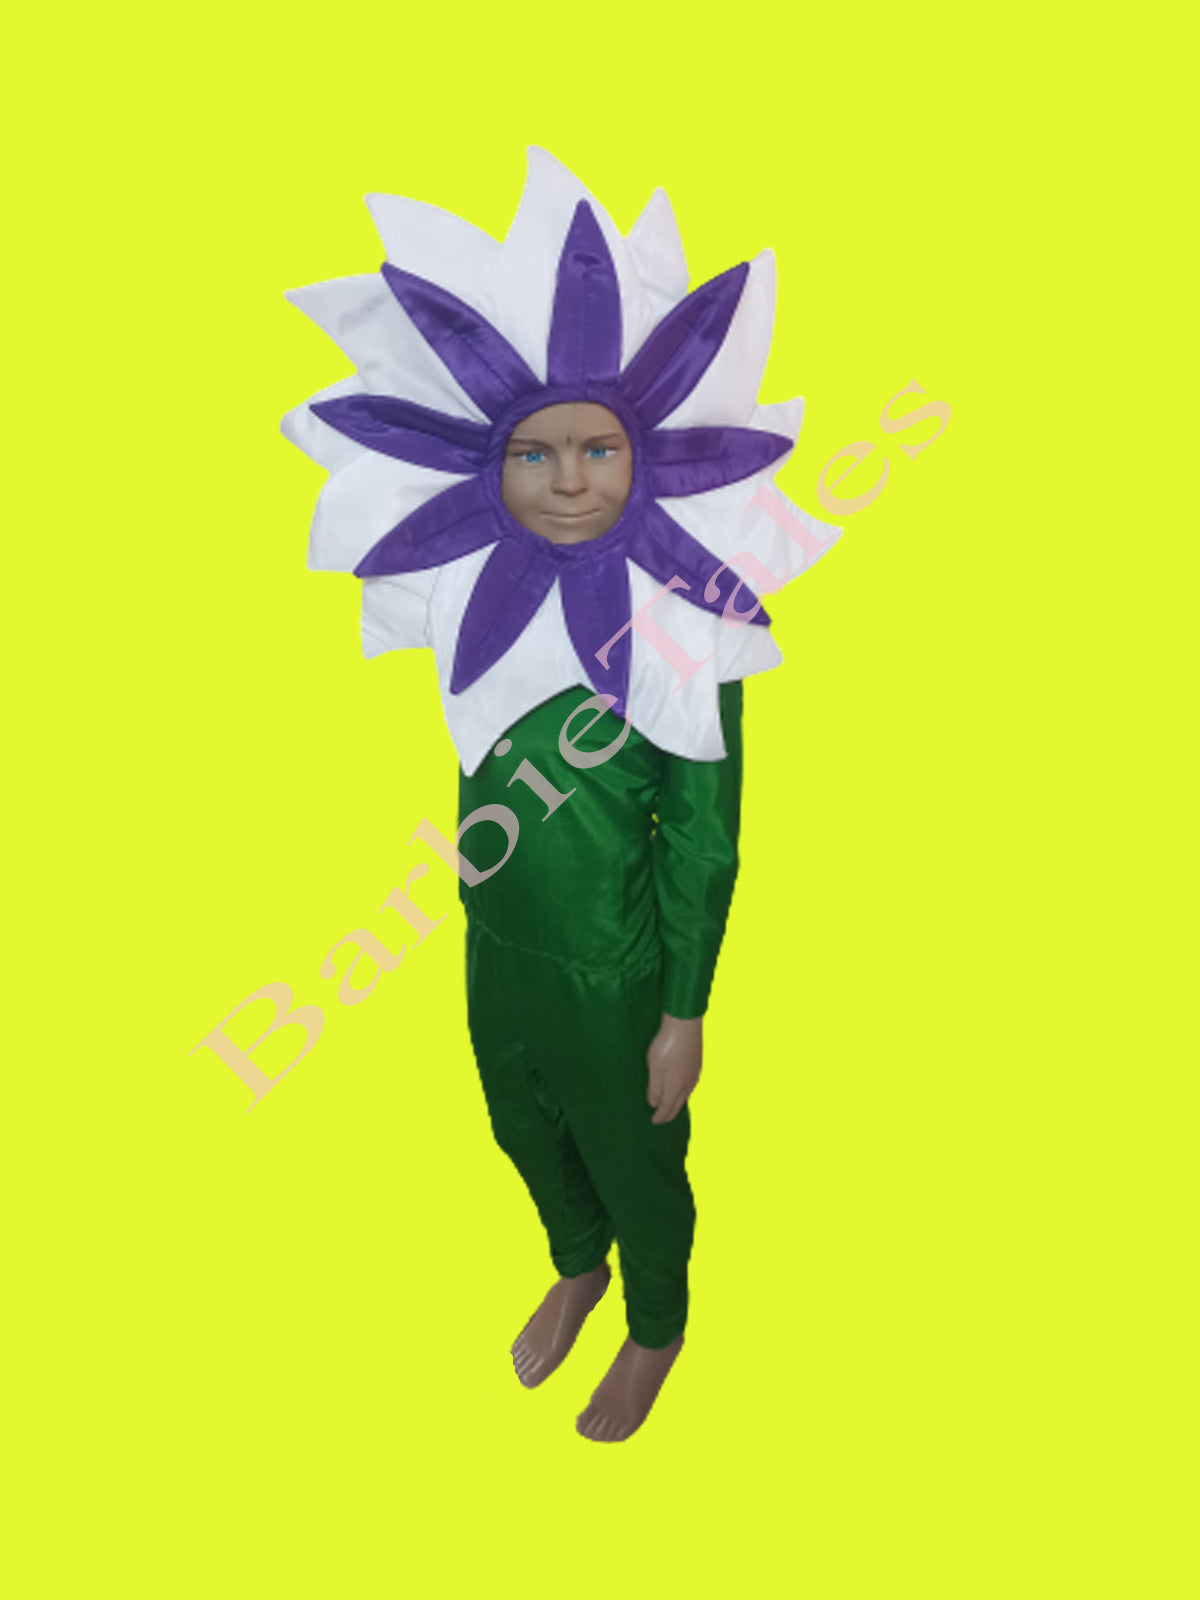 Riya's costume for Republic day fancy dress competition - National flower  lotus | Fancy dress competition, Fancy dress for kids, Fancy dress